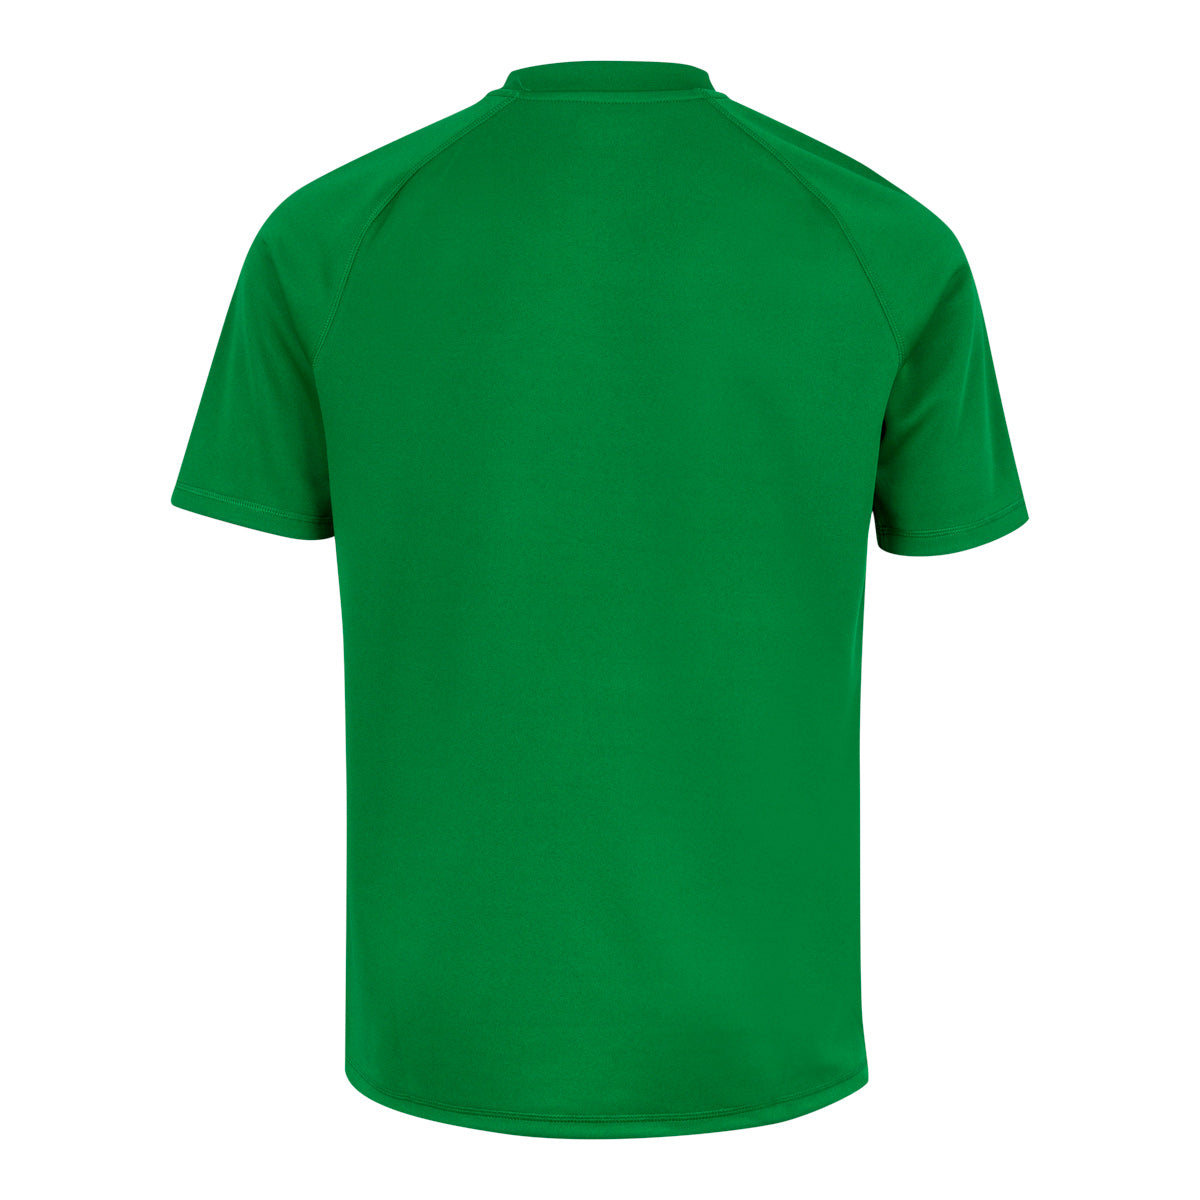 Maillot Rugby Telese Vert Homme - Image 2